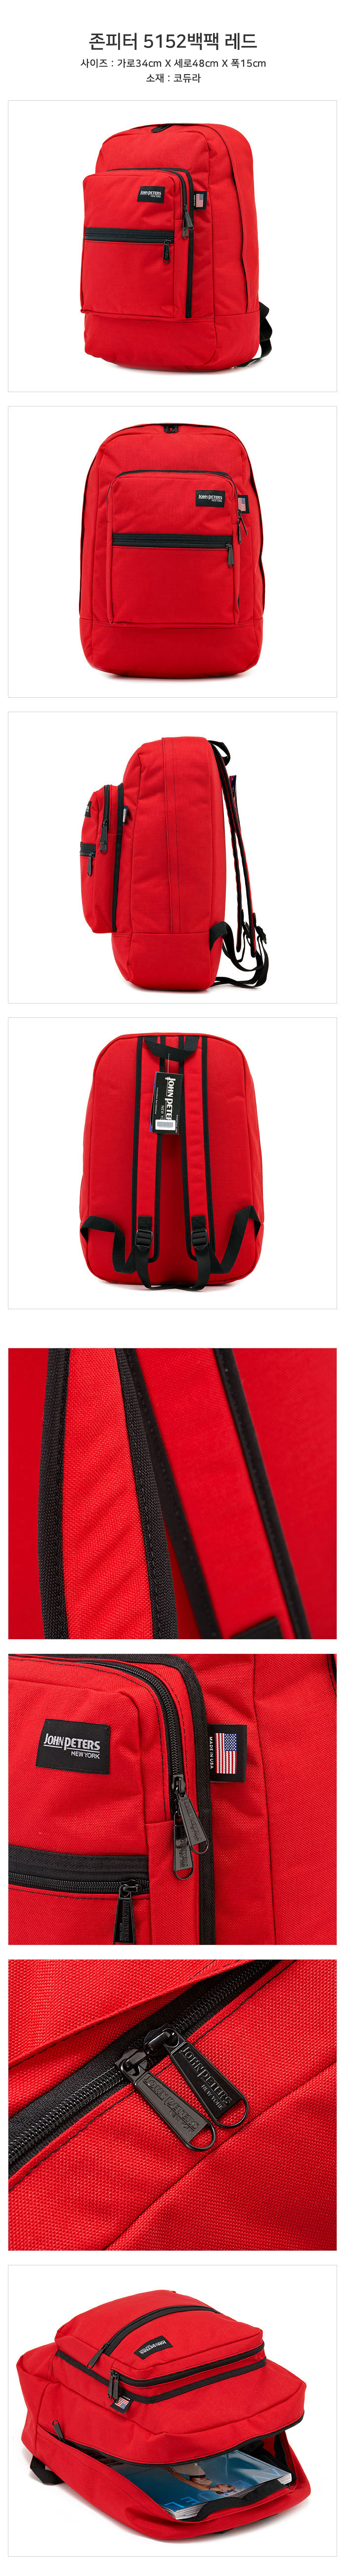 5152 Laptop Backpack Red